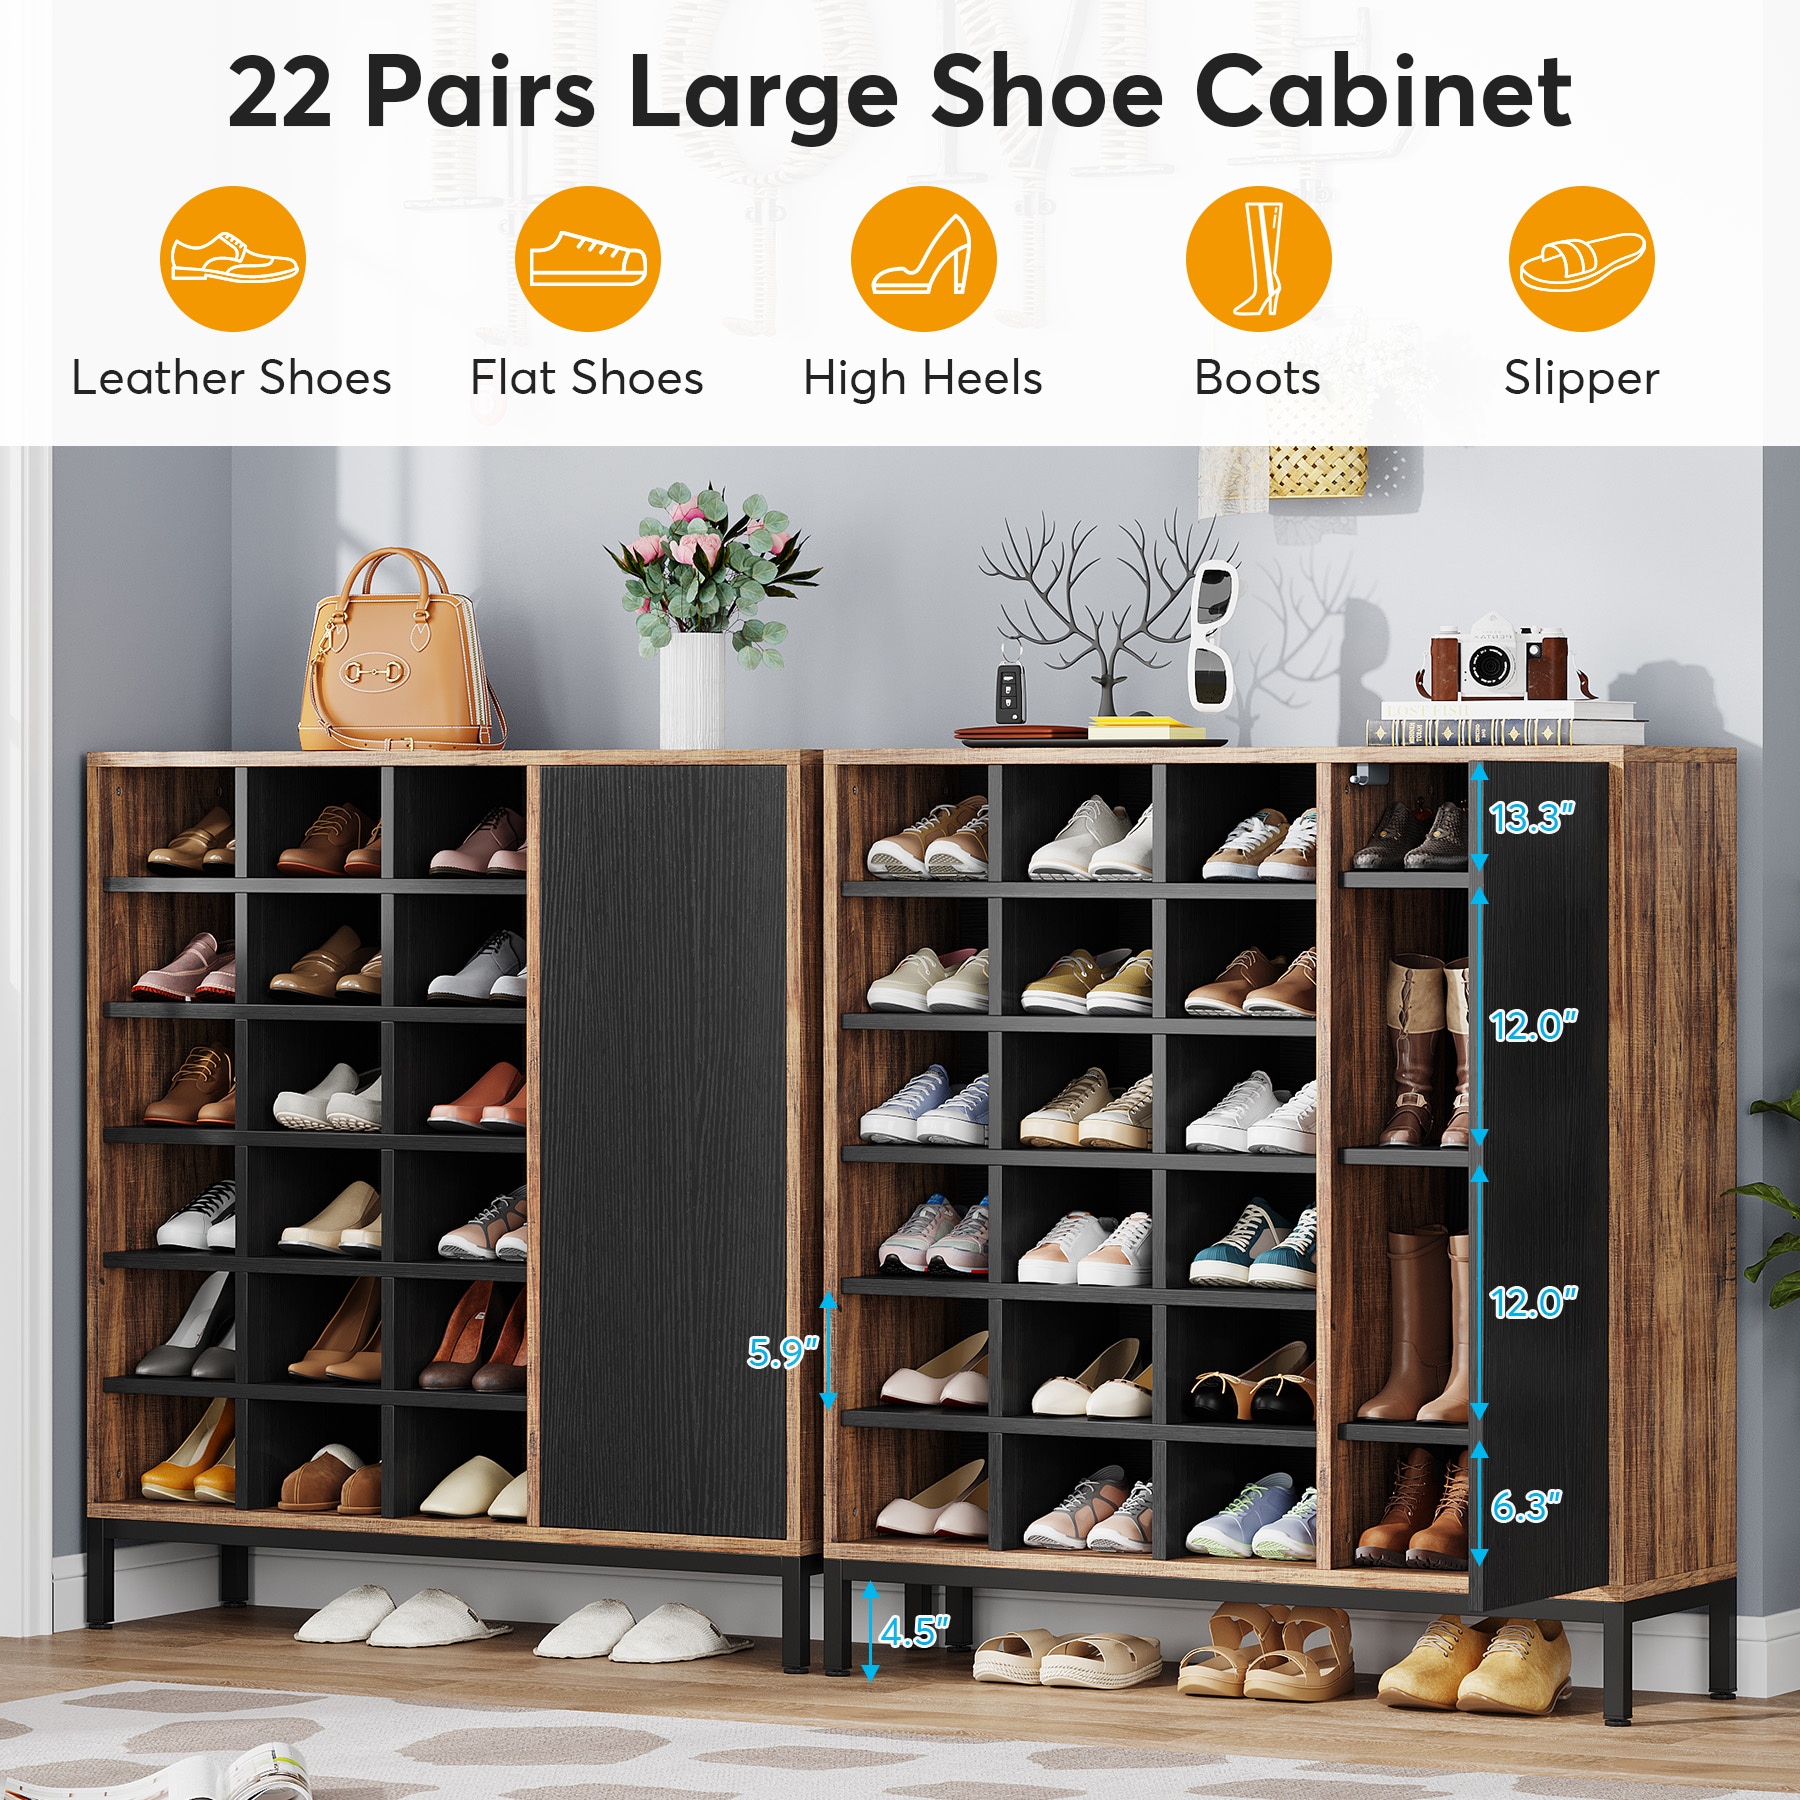  Tribesigns 10-Tier Shoe Storage Cabinet, Espresso Wooden Shoe  Rack with 30 Cubbies, Freestanding Tall Entryway Shoe Organizer for Closet,  Entryway, Living Room : Home & Kitchen